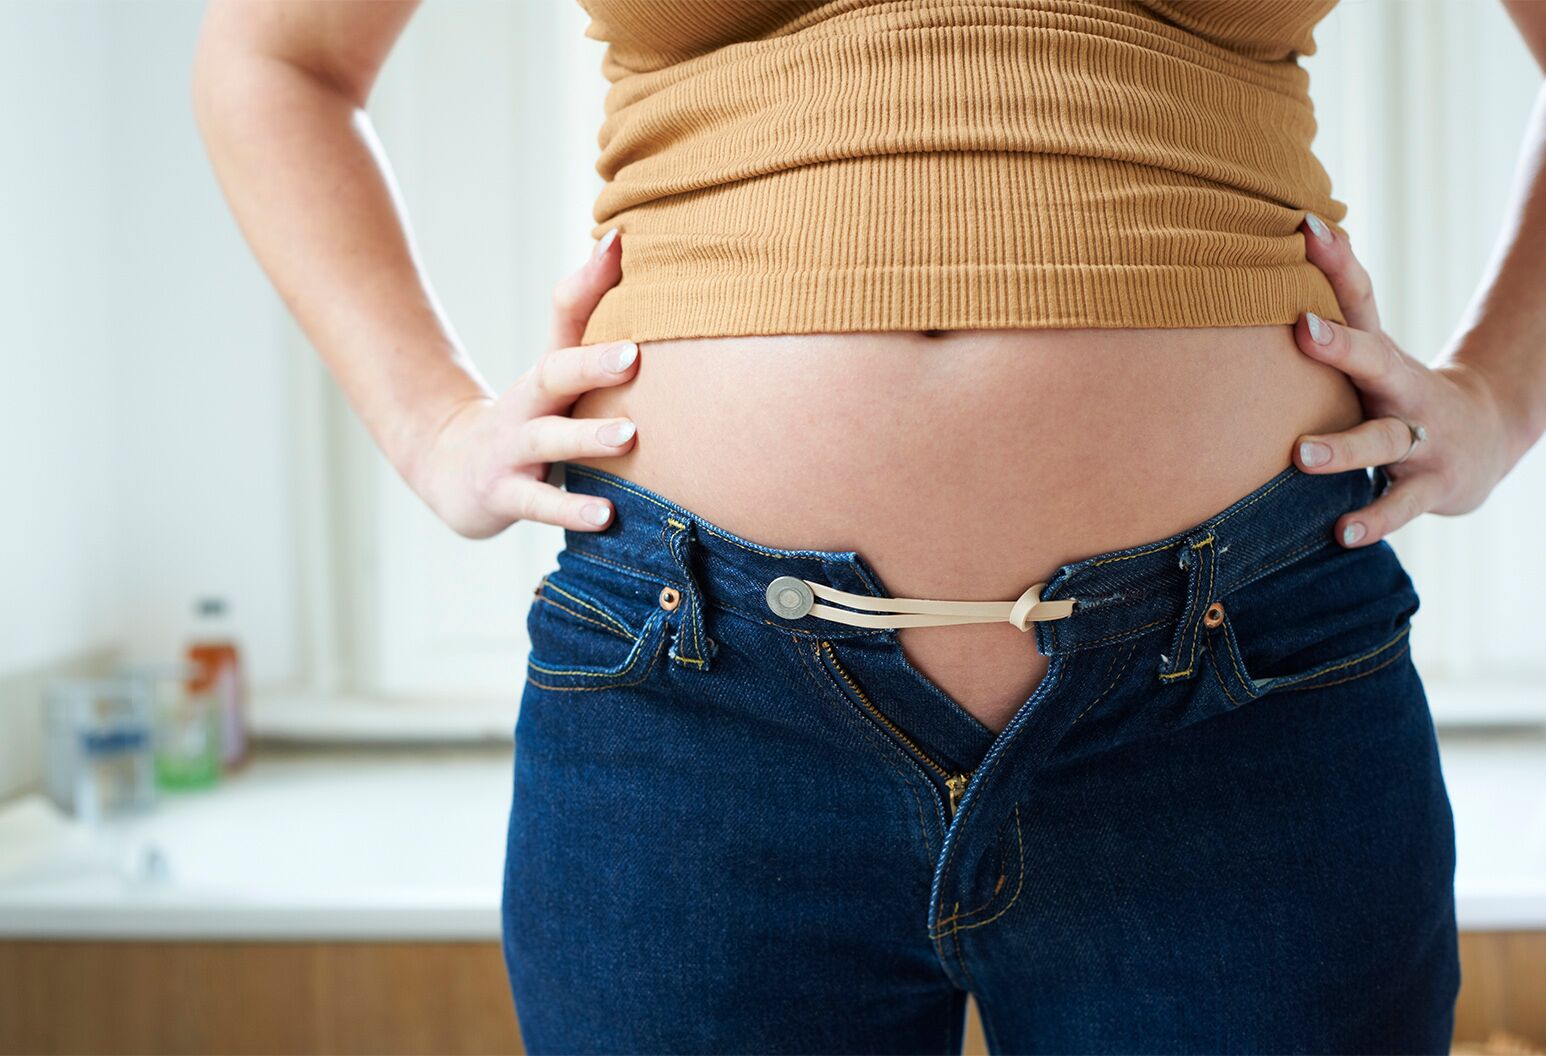 Feeling bloated? These foods will help you reduce bloating